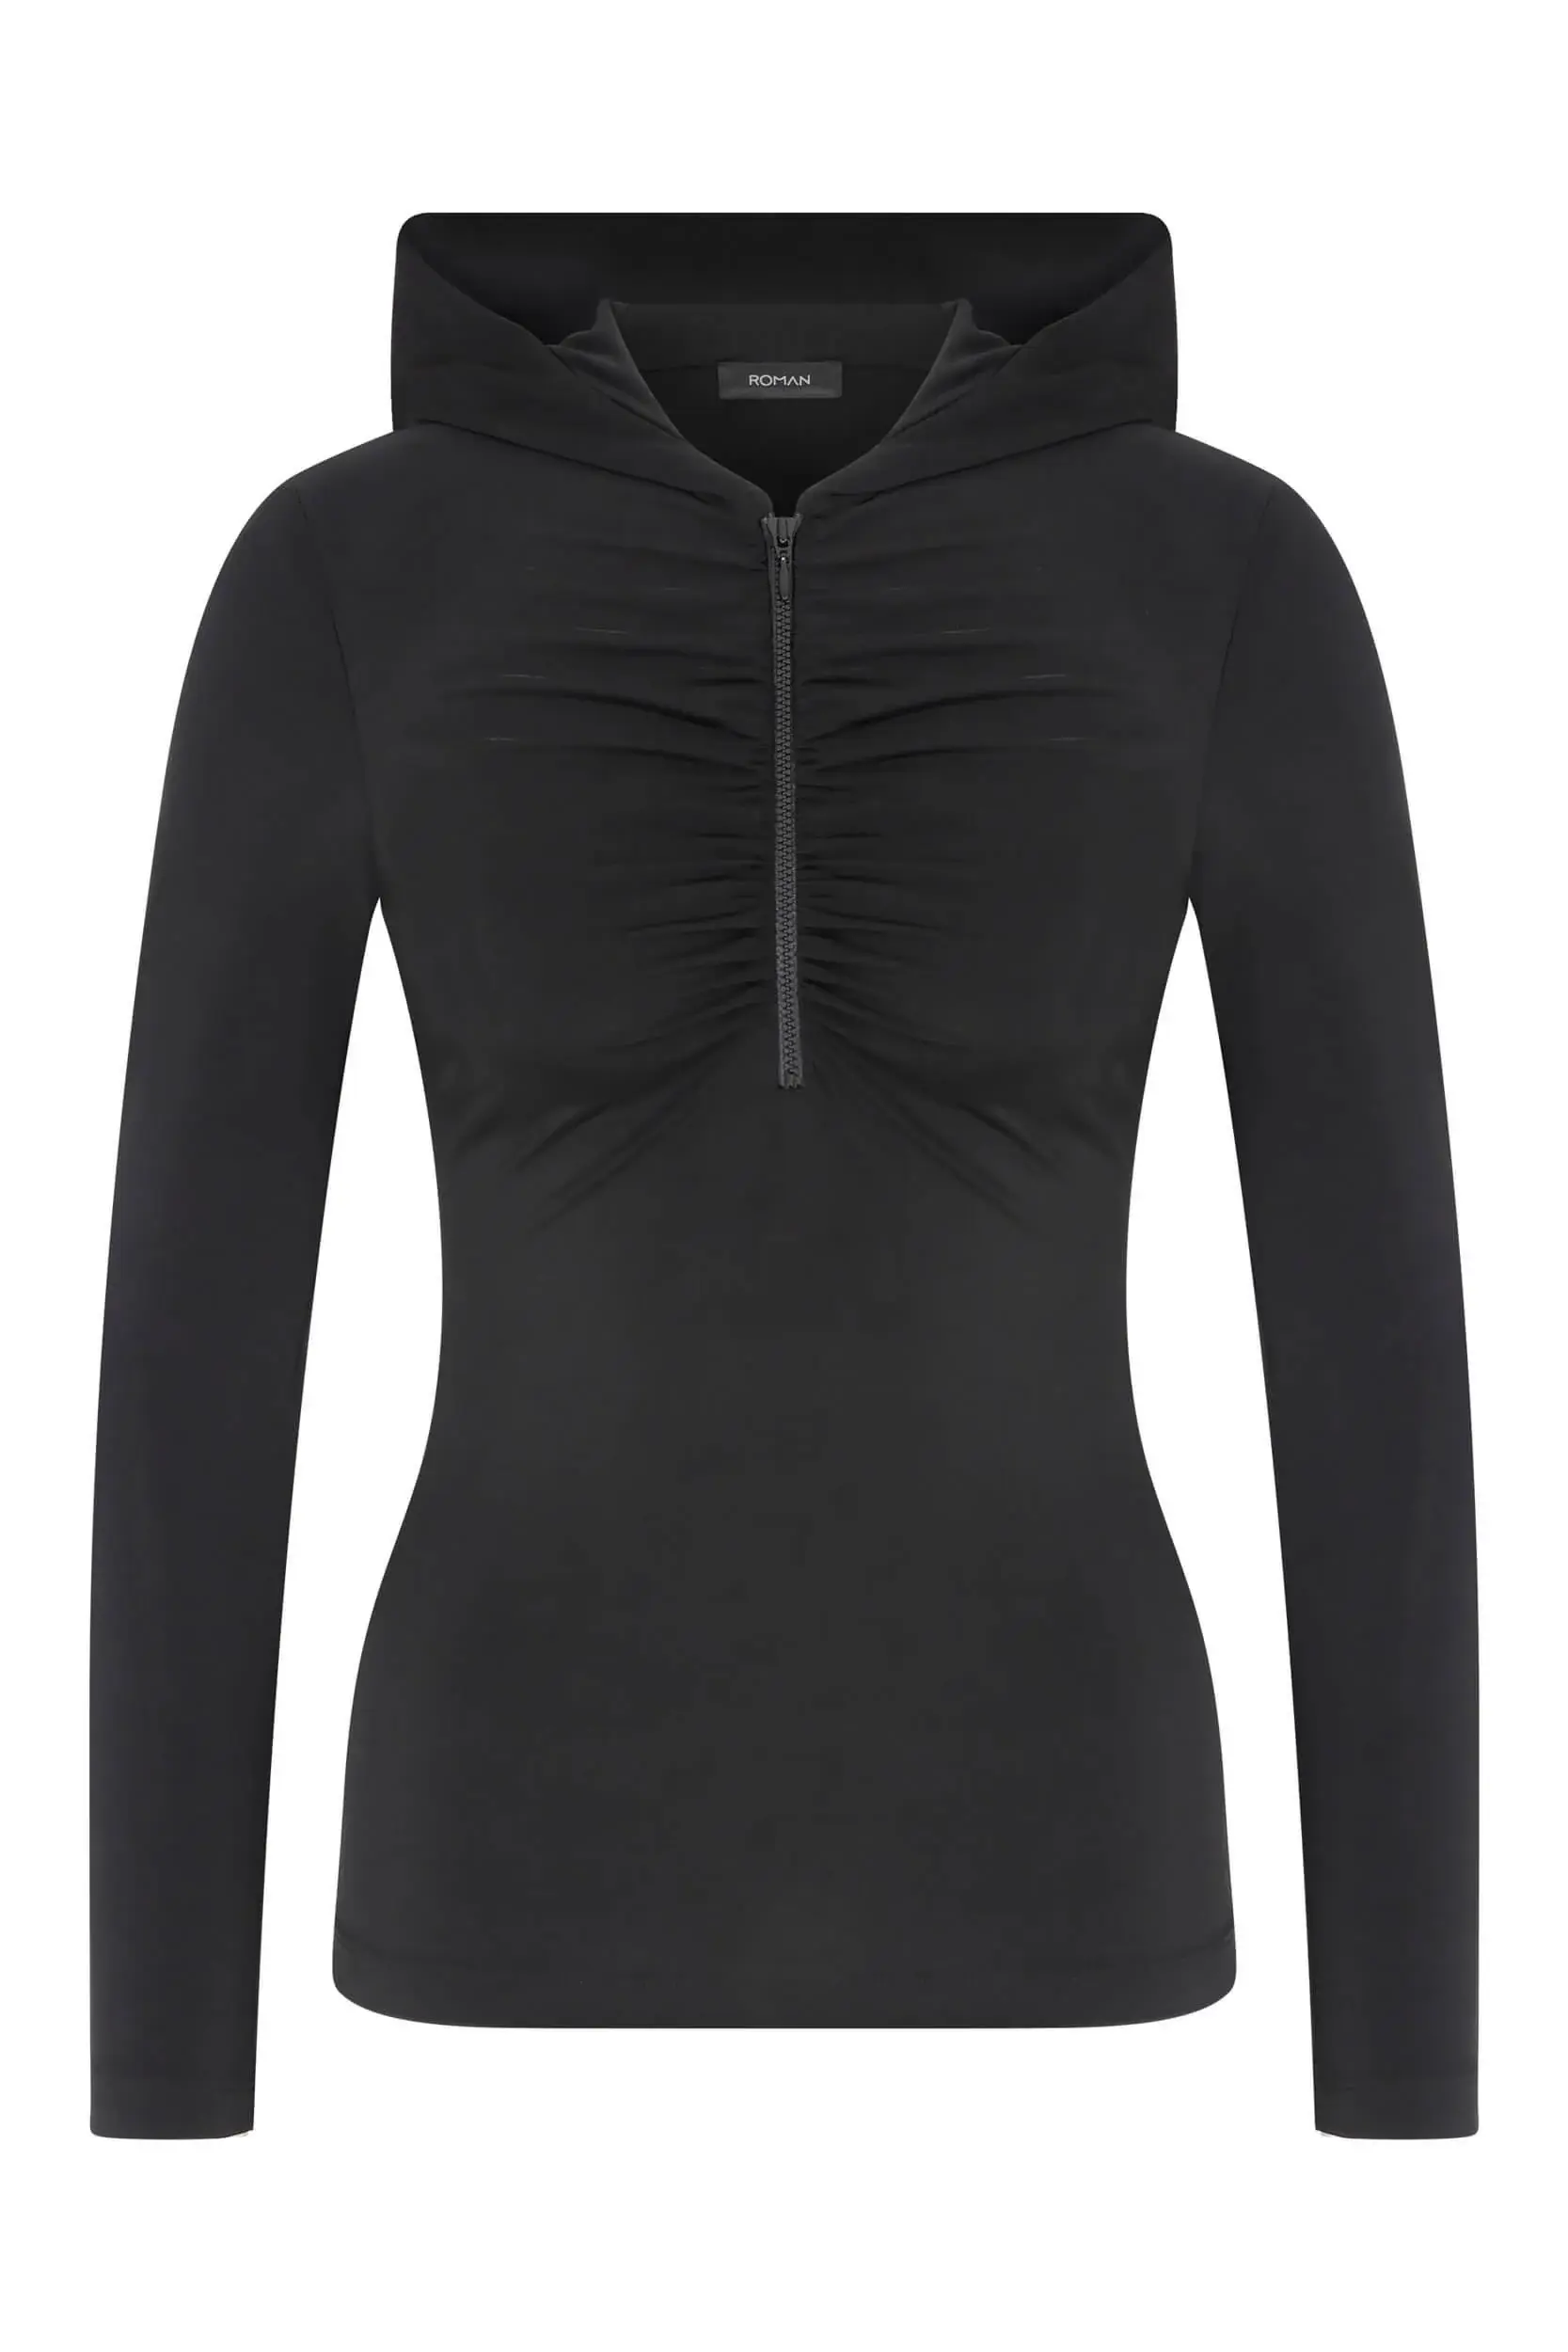 Roman Ruched Front Hooded Blouse - 4 / BLACK. 1